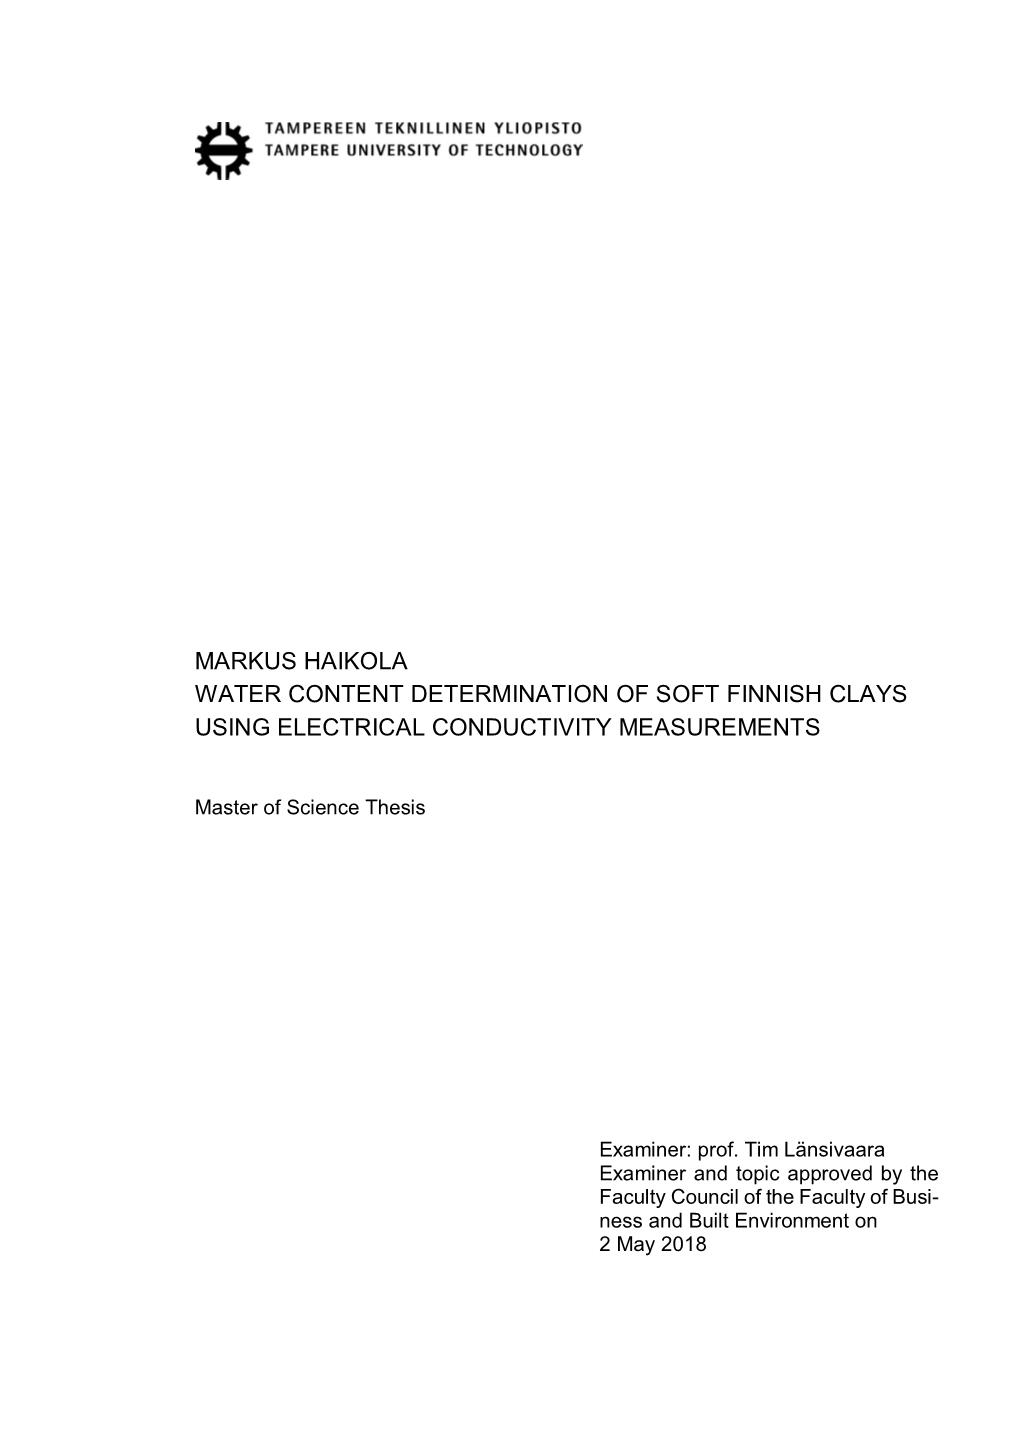 Water Content Determination of Soft Finnish Clays Using Electrical Conductivity Measurements